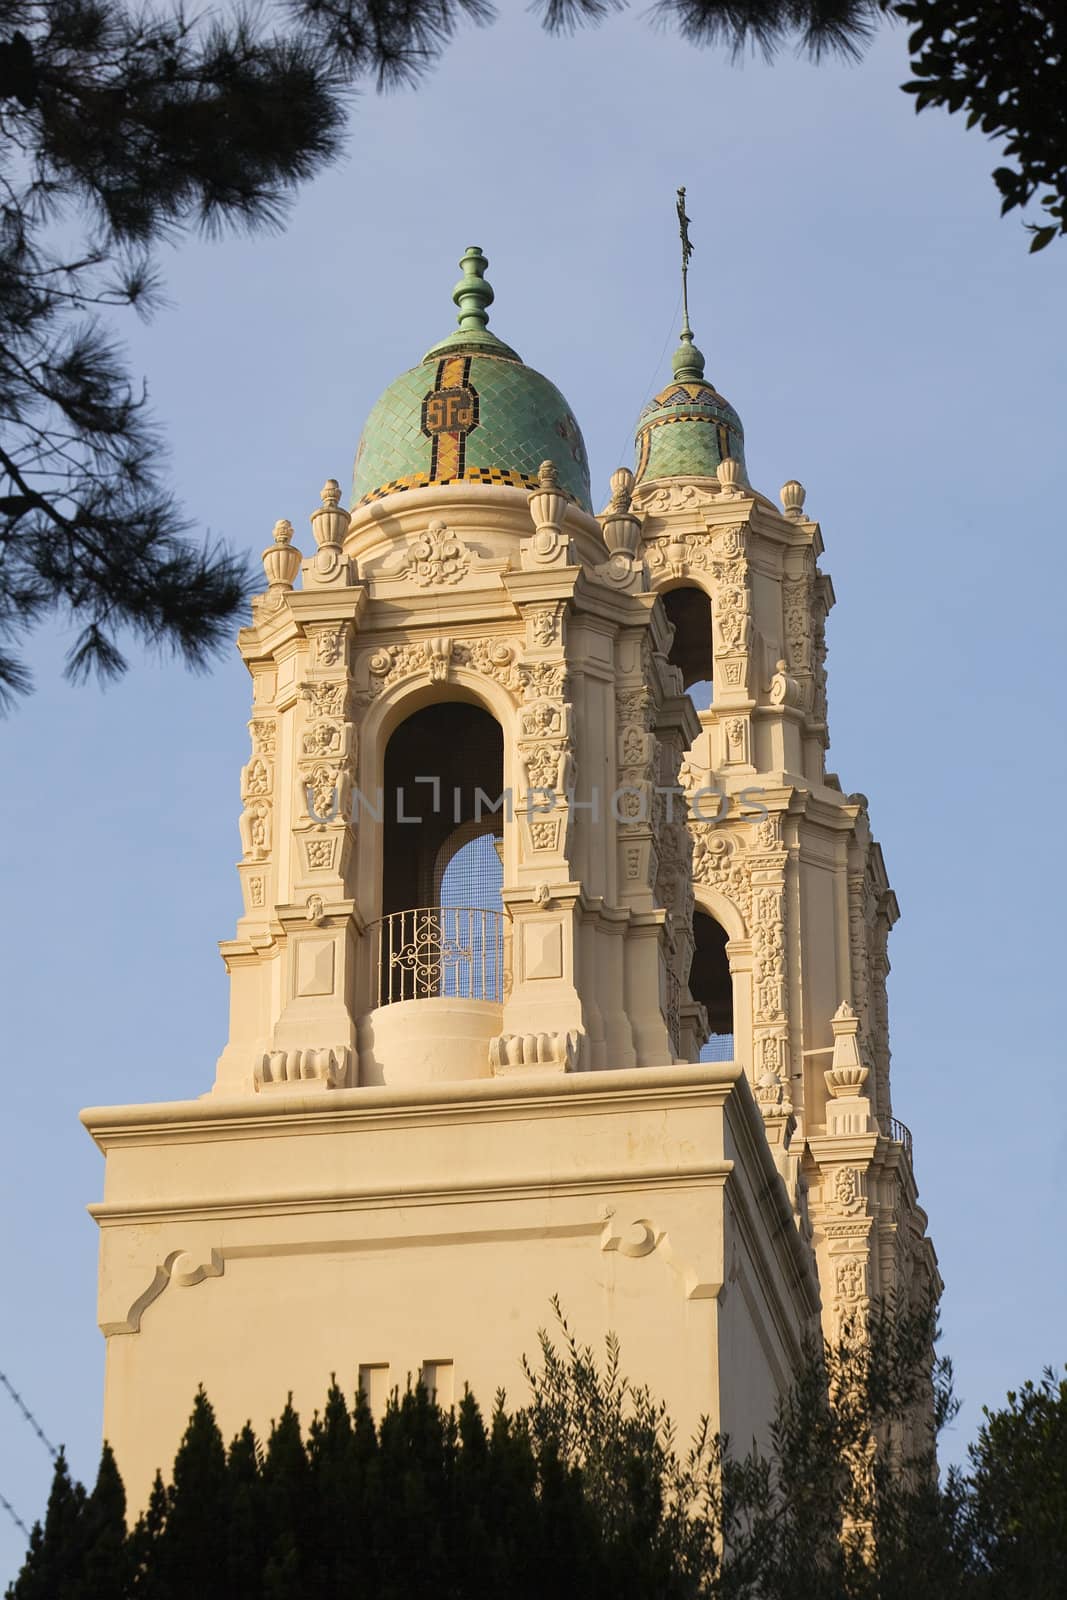 Mission Dolores Steeples Ornate Carvings San Francisco California